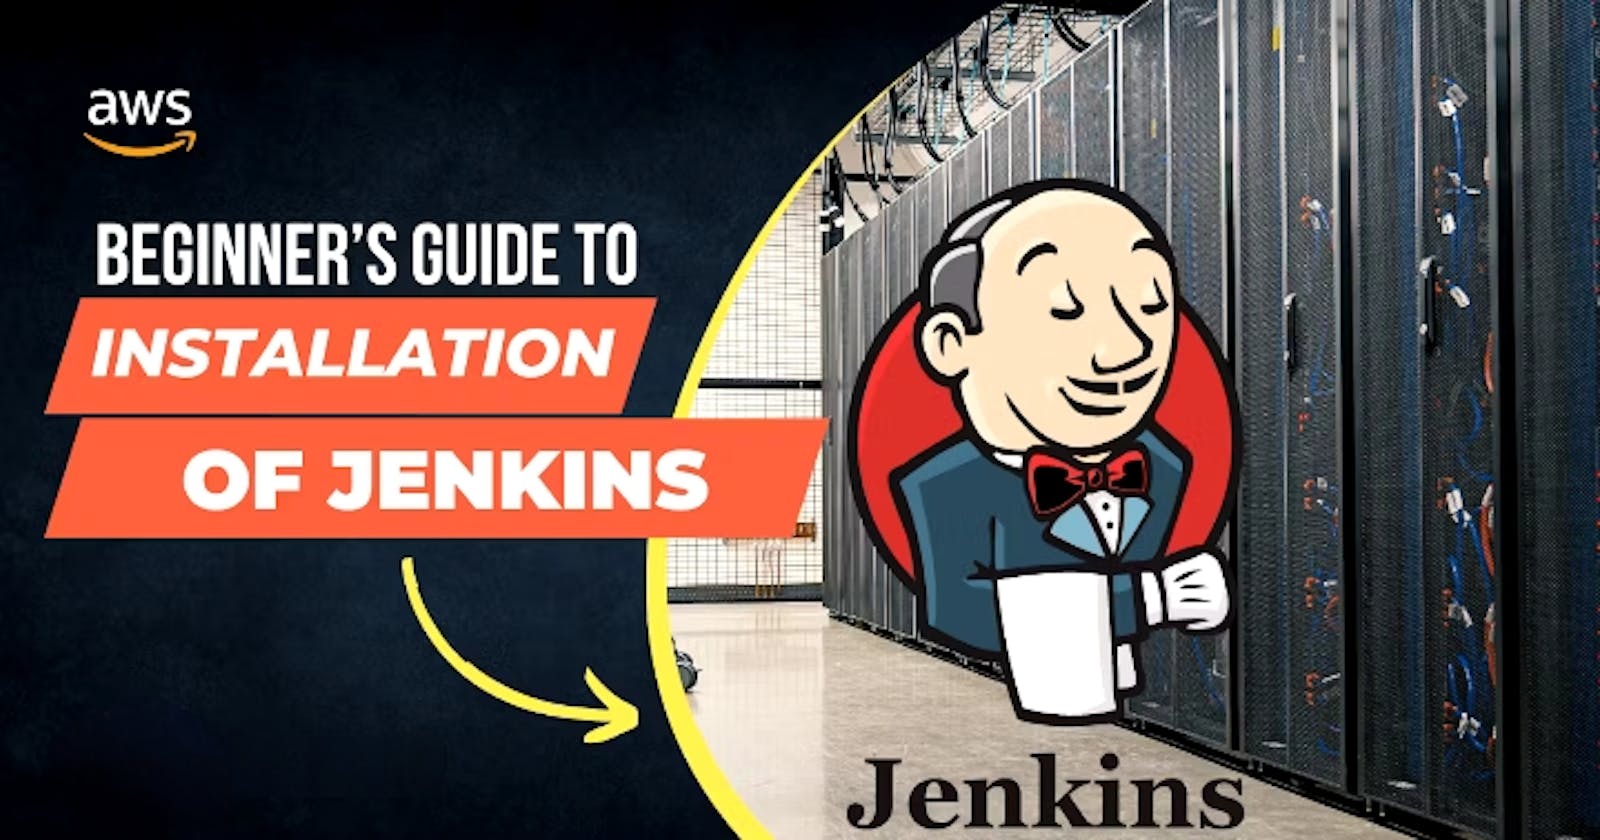 🛠Day 22 - Getting Started with Jenkins